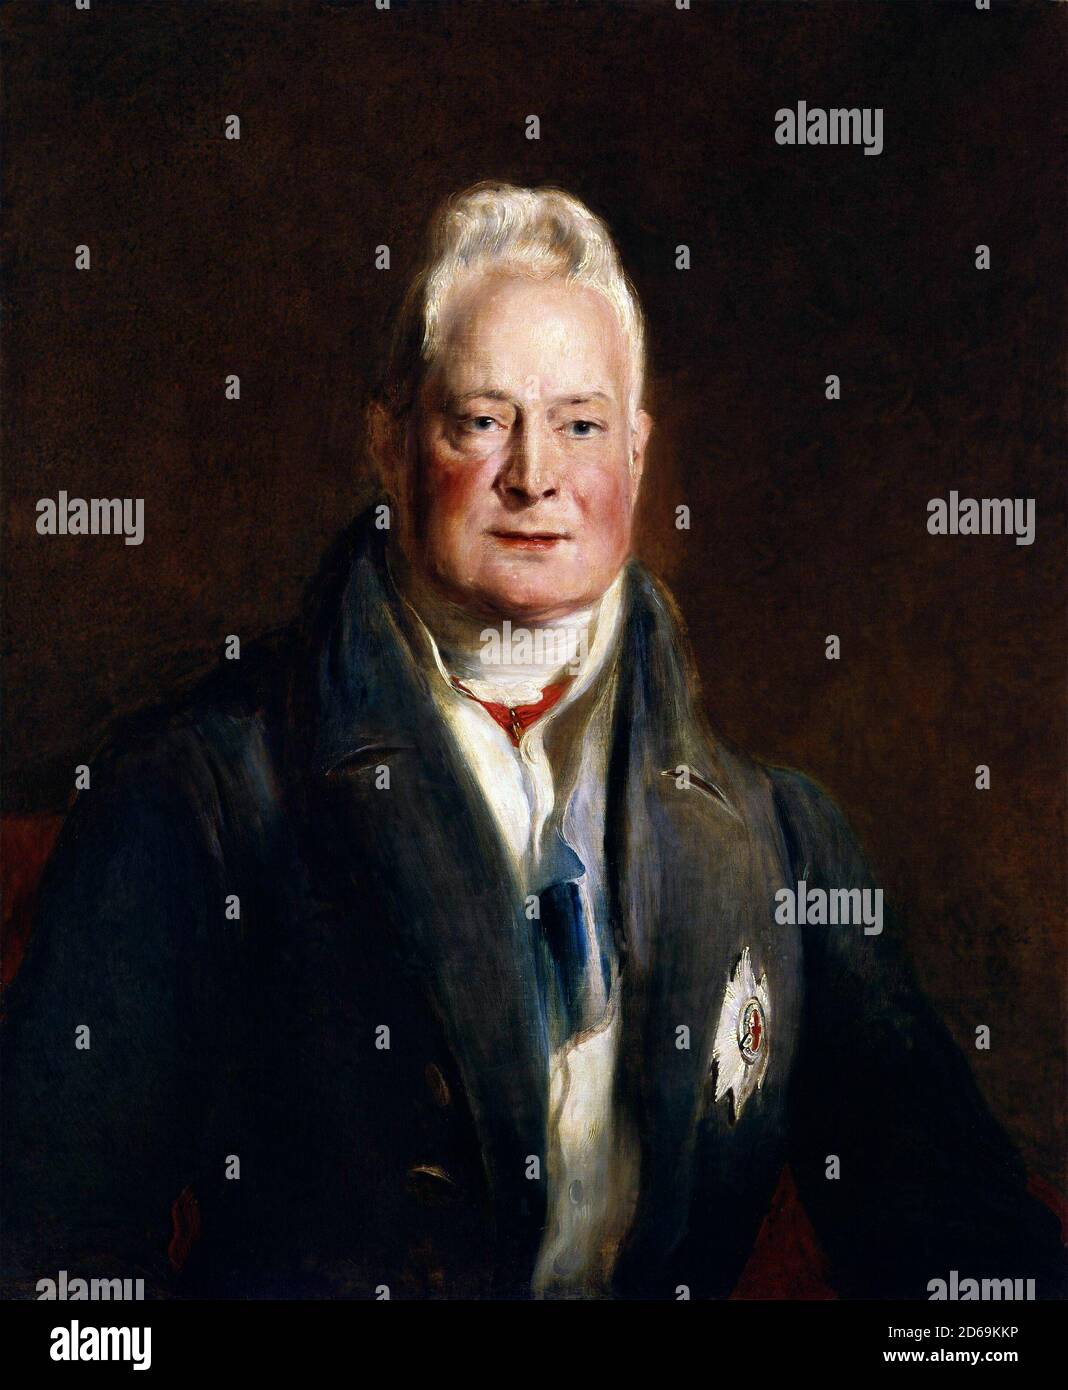 William IV. Portrait of King William IV (William Henry; 1765-1837) by David Wilkie, oil on canvas, c.1837. Stock Photo